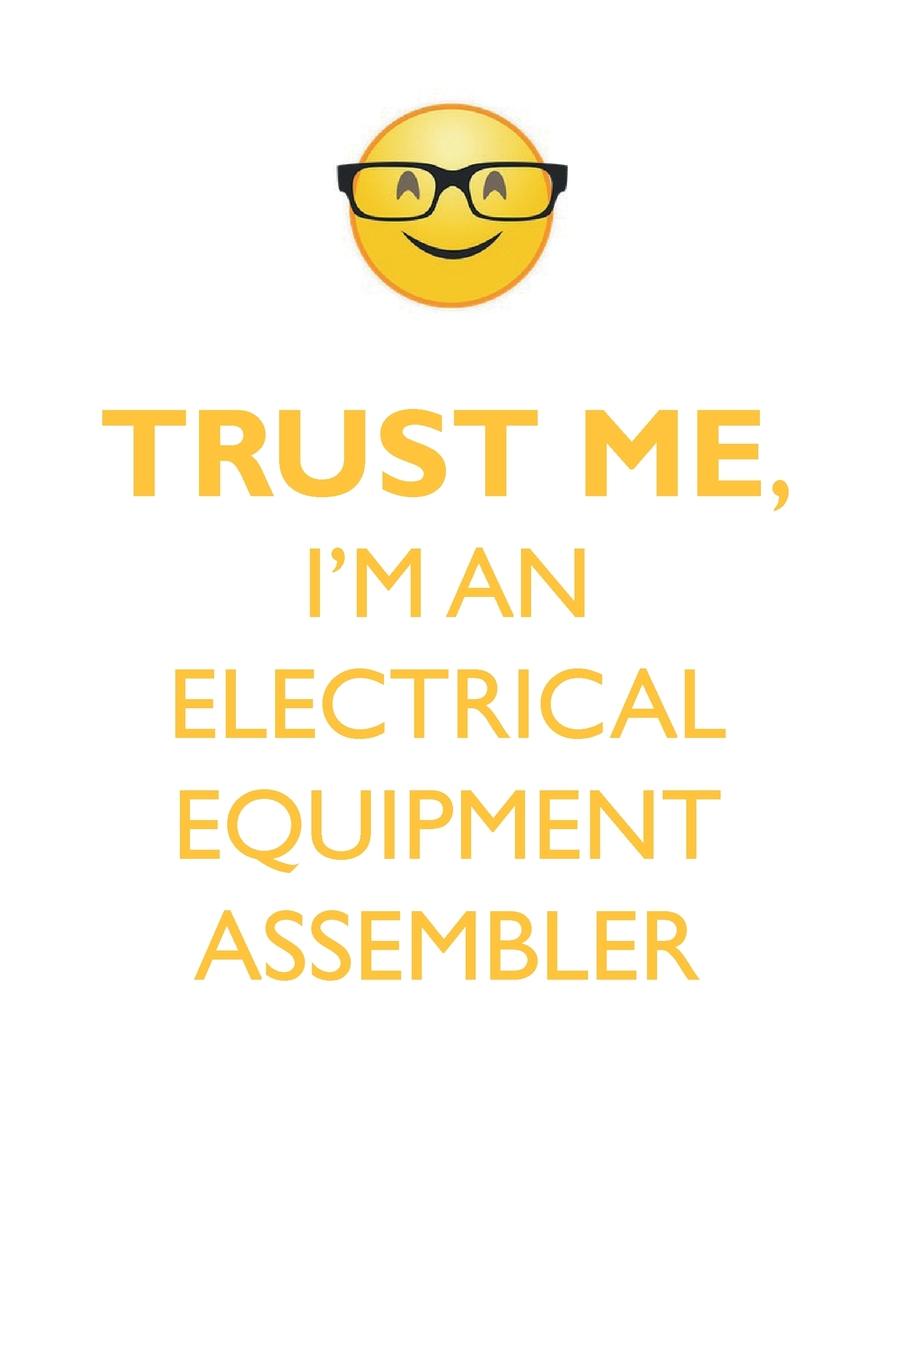 TRUST ME, I`M AN ELECTRICAL EQUIPMENT ASSEMBLER AFFIRMATIONS WORKBOOK Positive Affirmations Workbook. Includes. Mentoring Questions, Guidance, Supporting You.